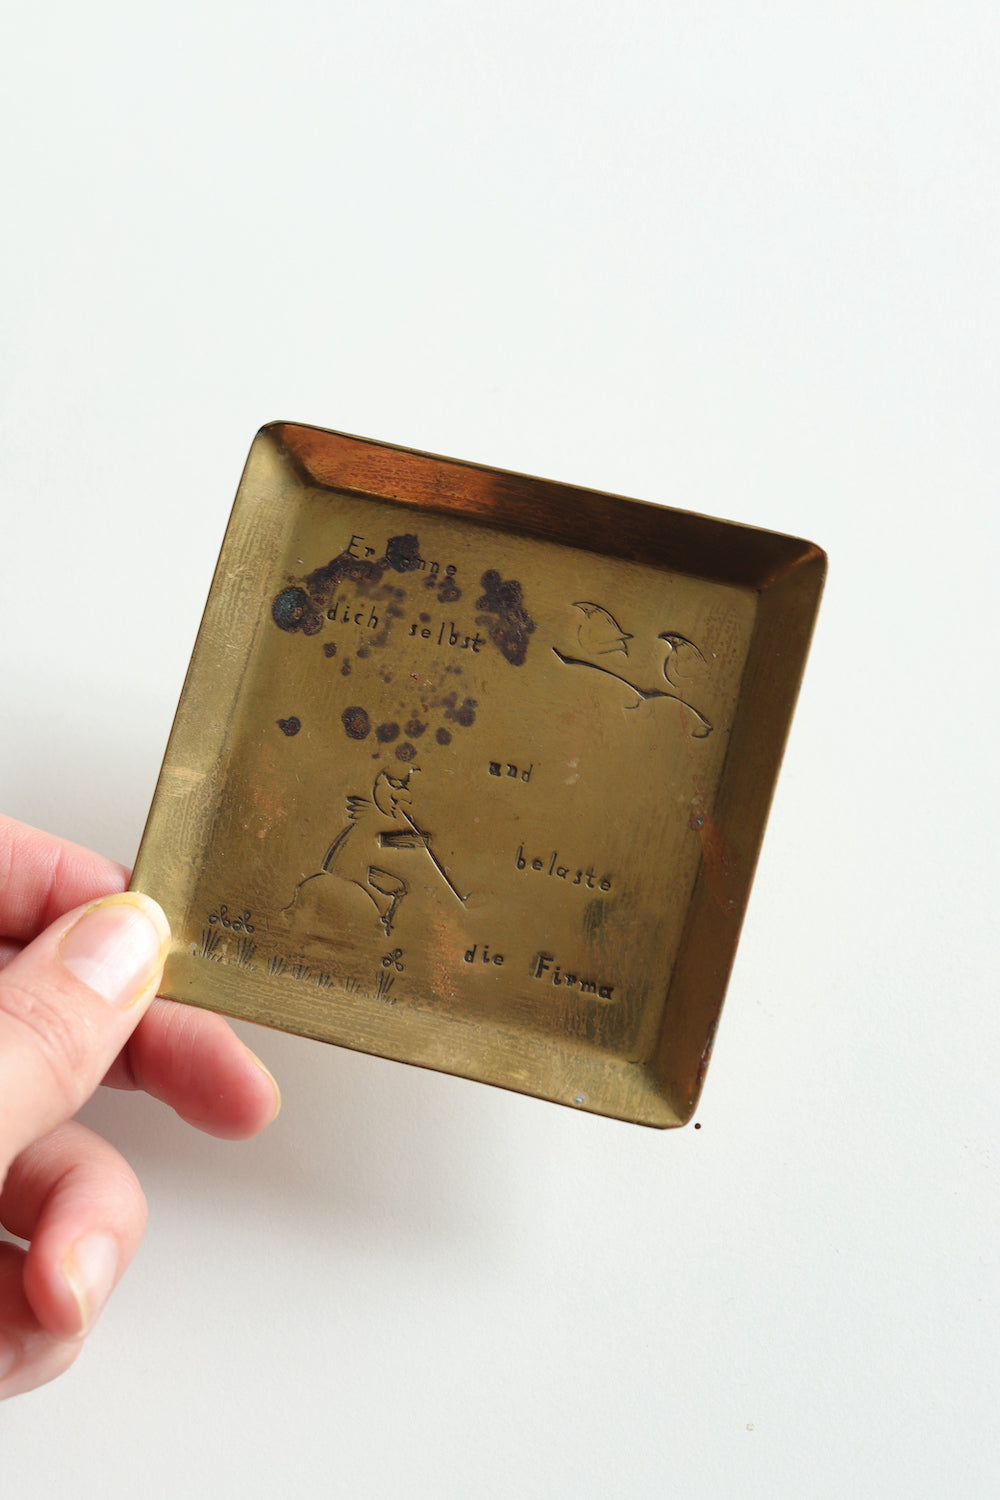 Small square brass plate